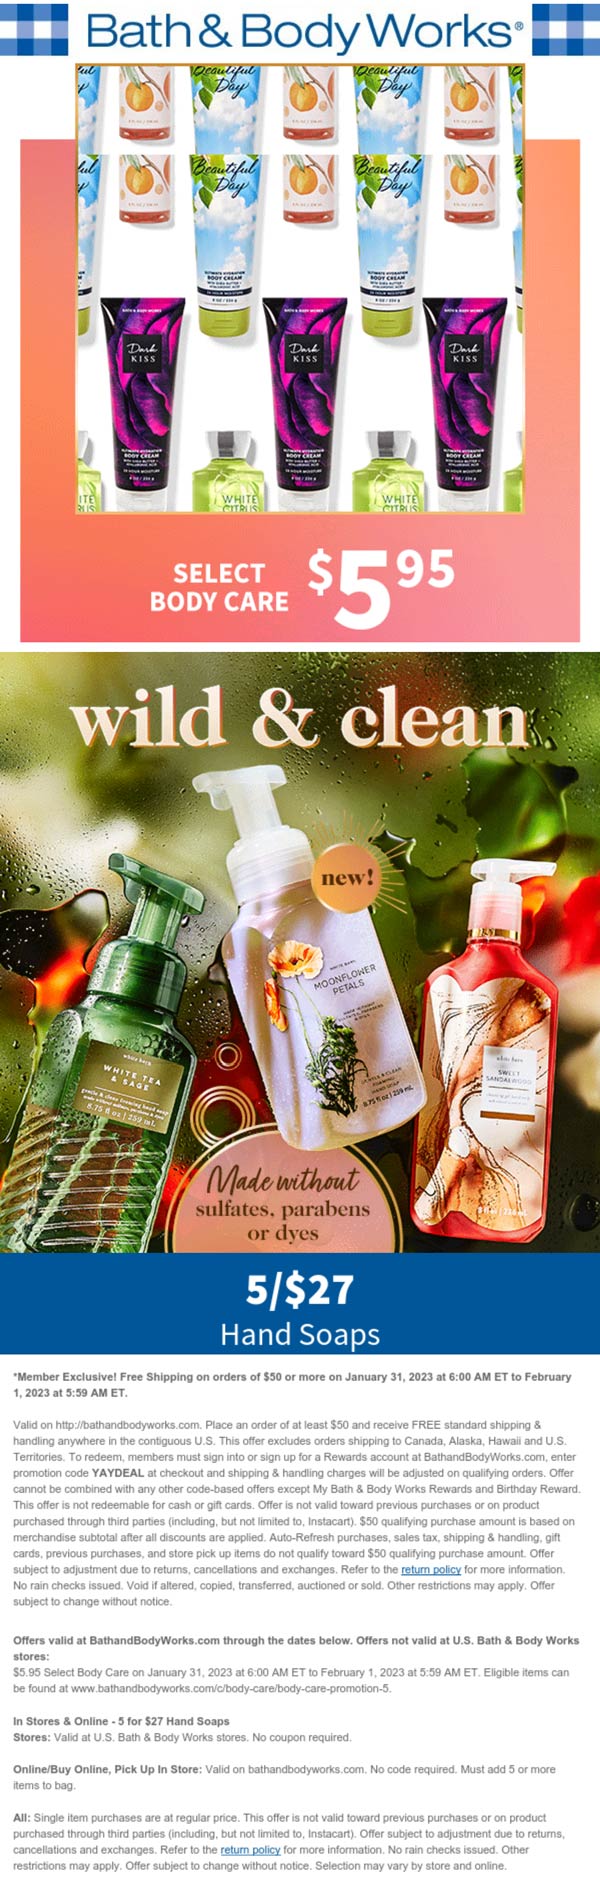 Bath & Body Works stores Coupon  $6 body care & 5 hand soaps for $27 at Bath & Body Works, or online via promo code YAYDEAL #bathbodyworks 